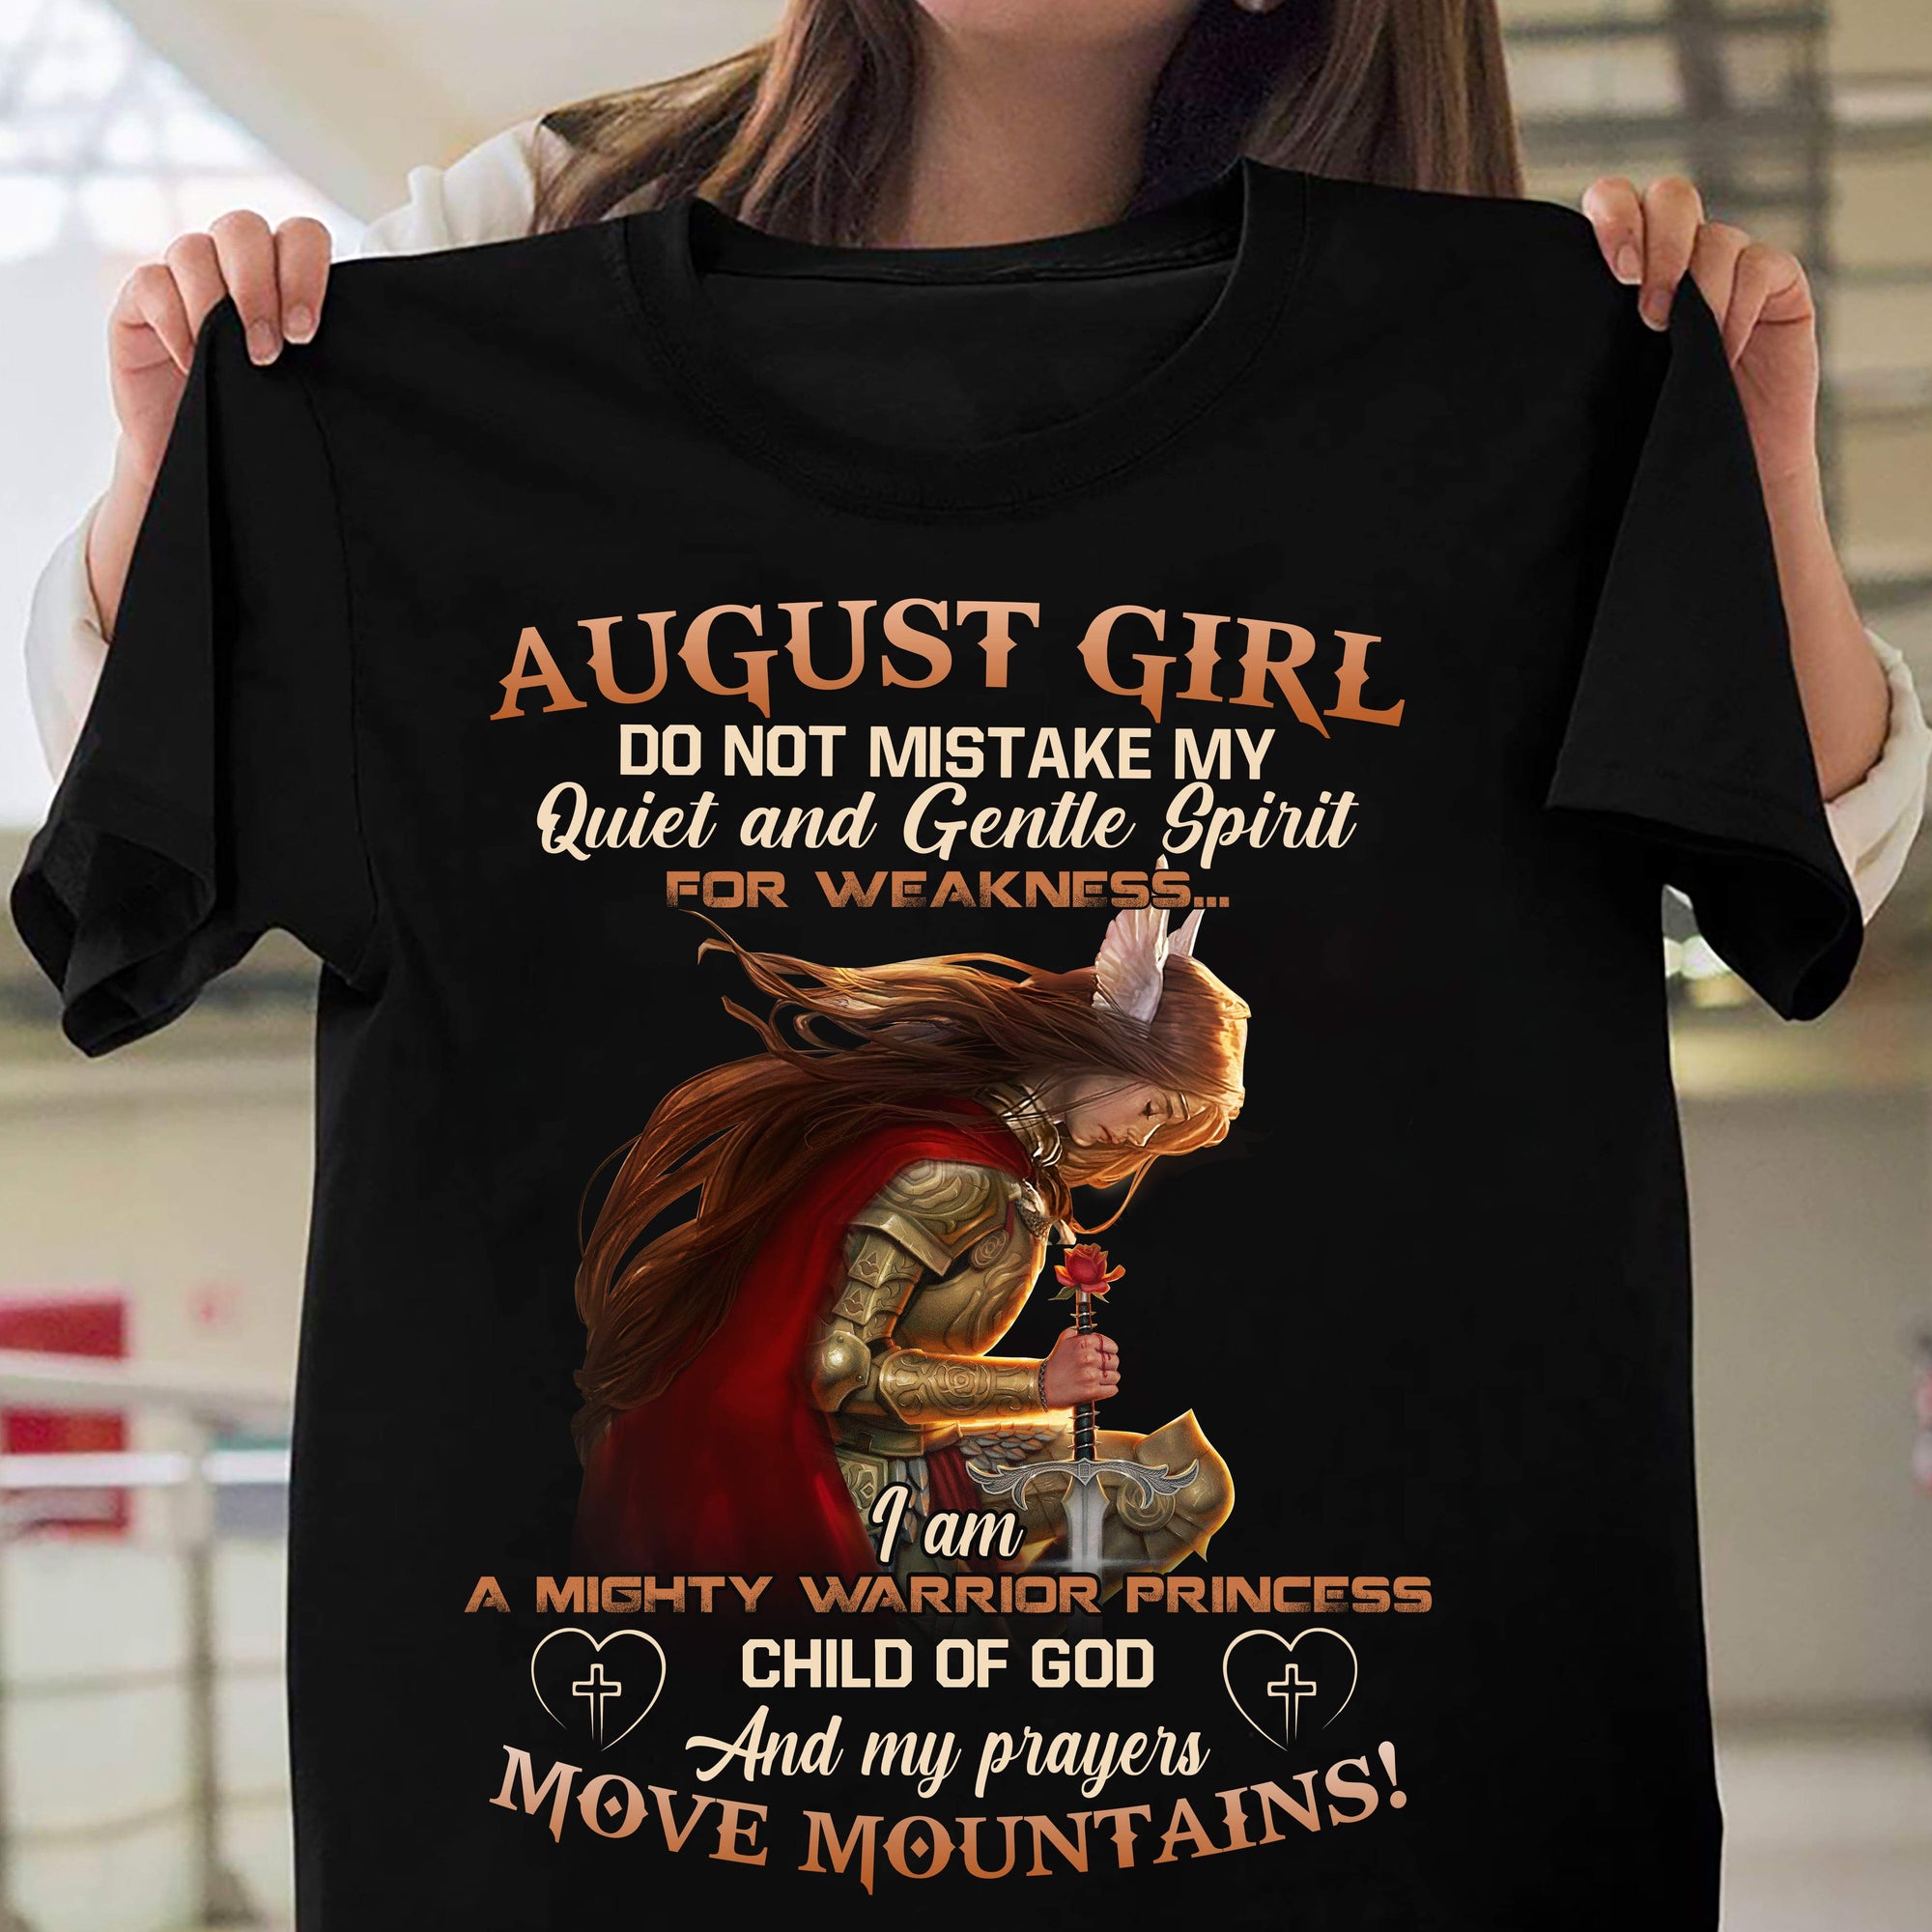 August girl, Mighty warrior princess, child of God and my prayers move mountains Jesus Black Apparel